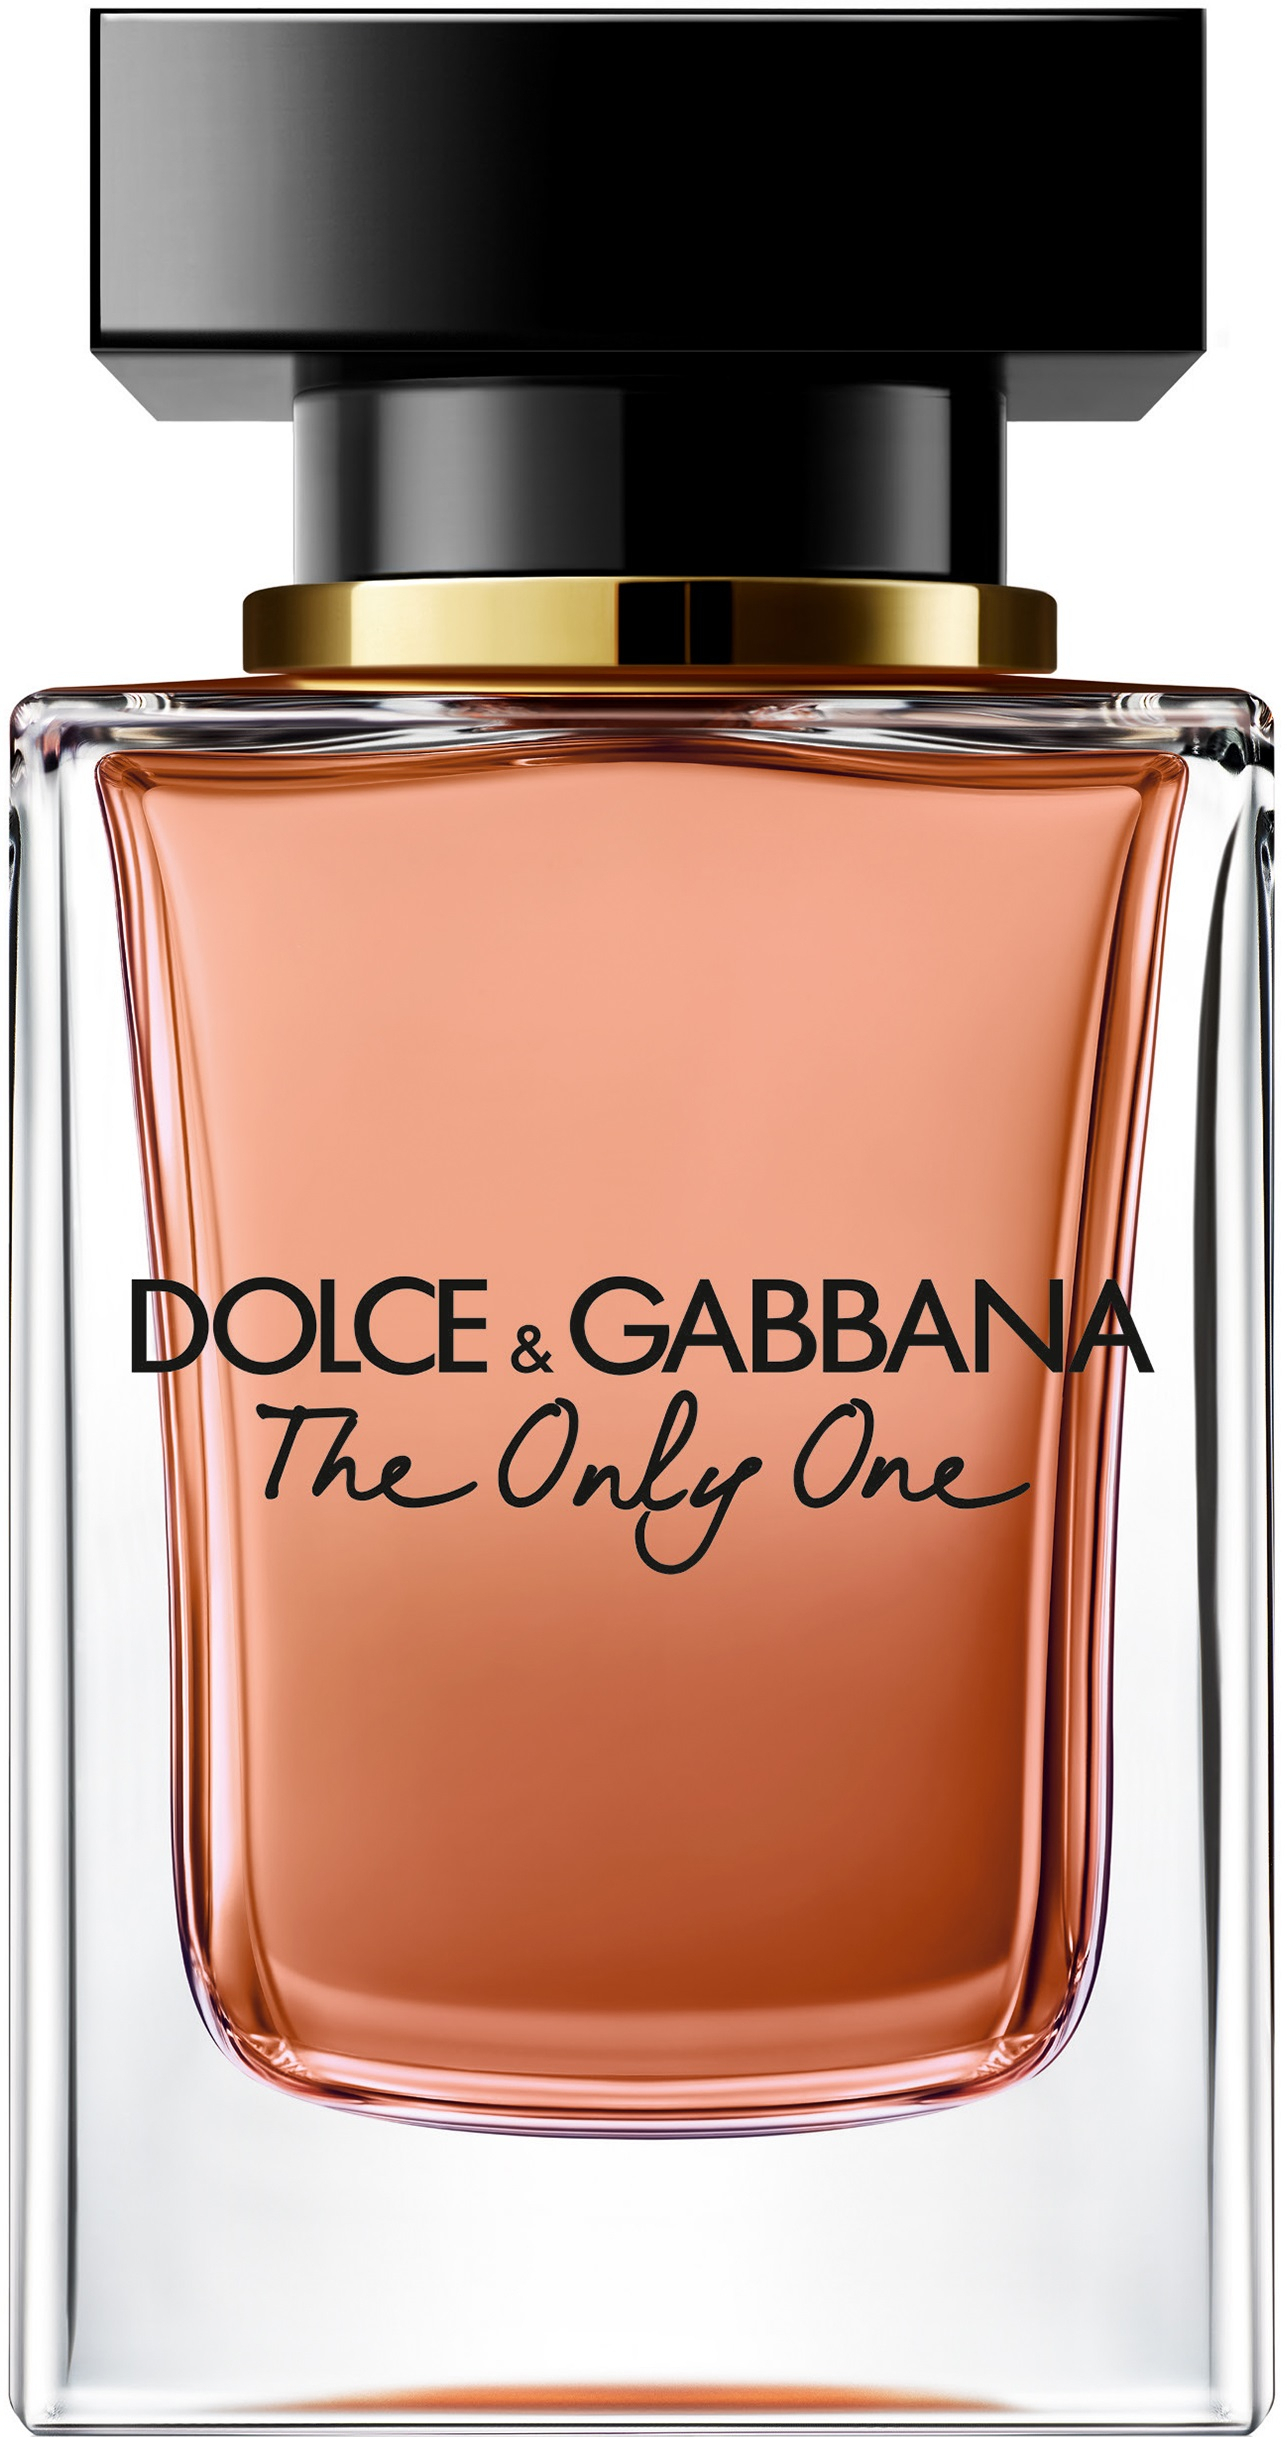 Духи dolce only one. Dolce & Gabbana the only one, EDP., 100 ml. Dolce & Gabbana the only one EDP 50 ml. Dolce Gabbana the only one 100ml. Dolce & Gabbana the only one 100 мл.